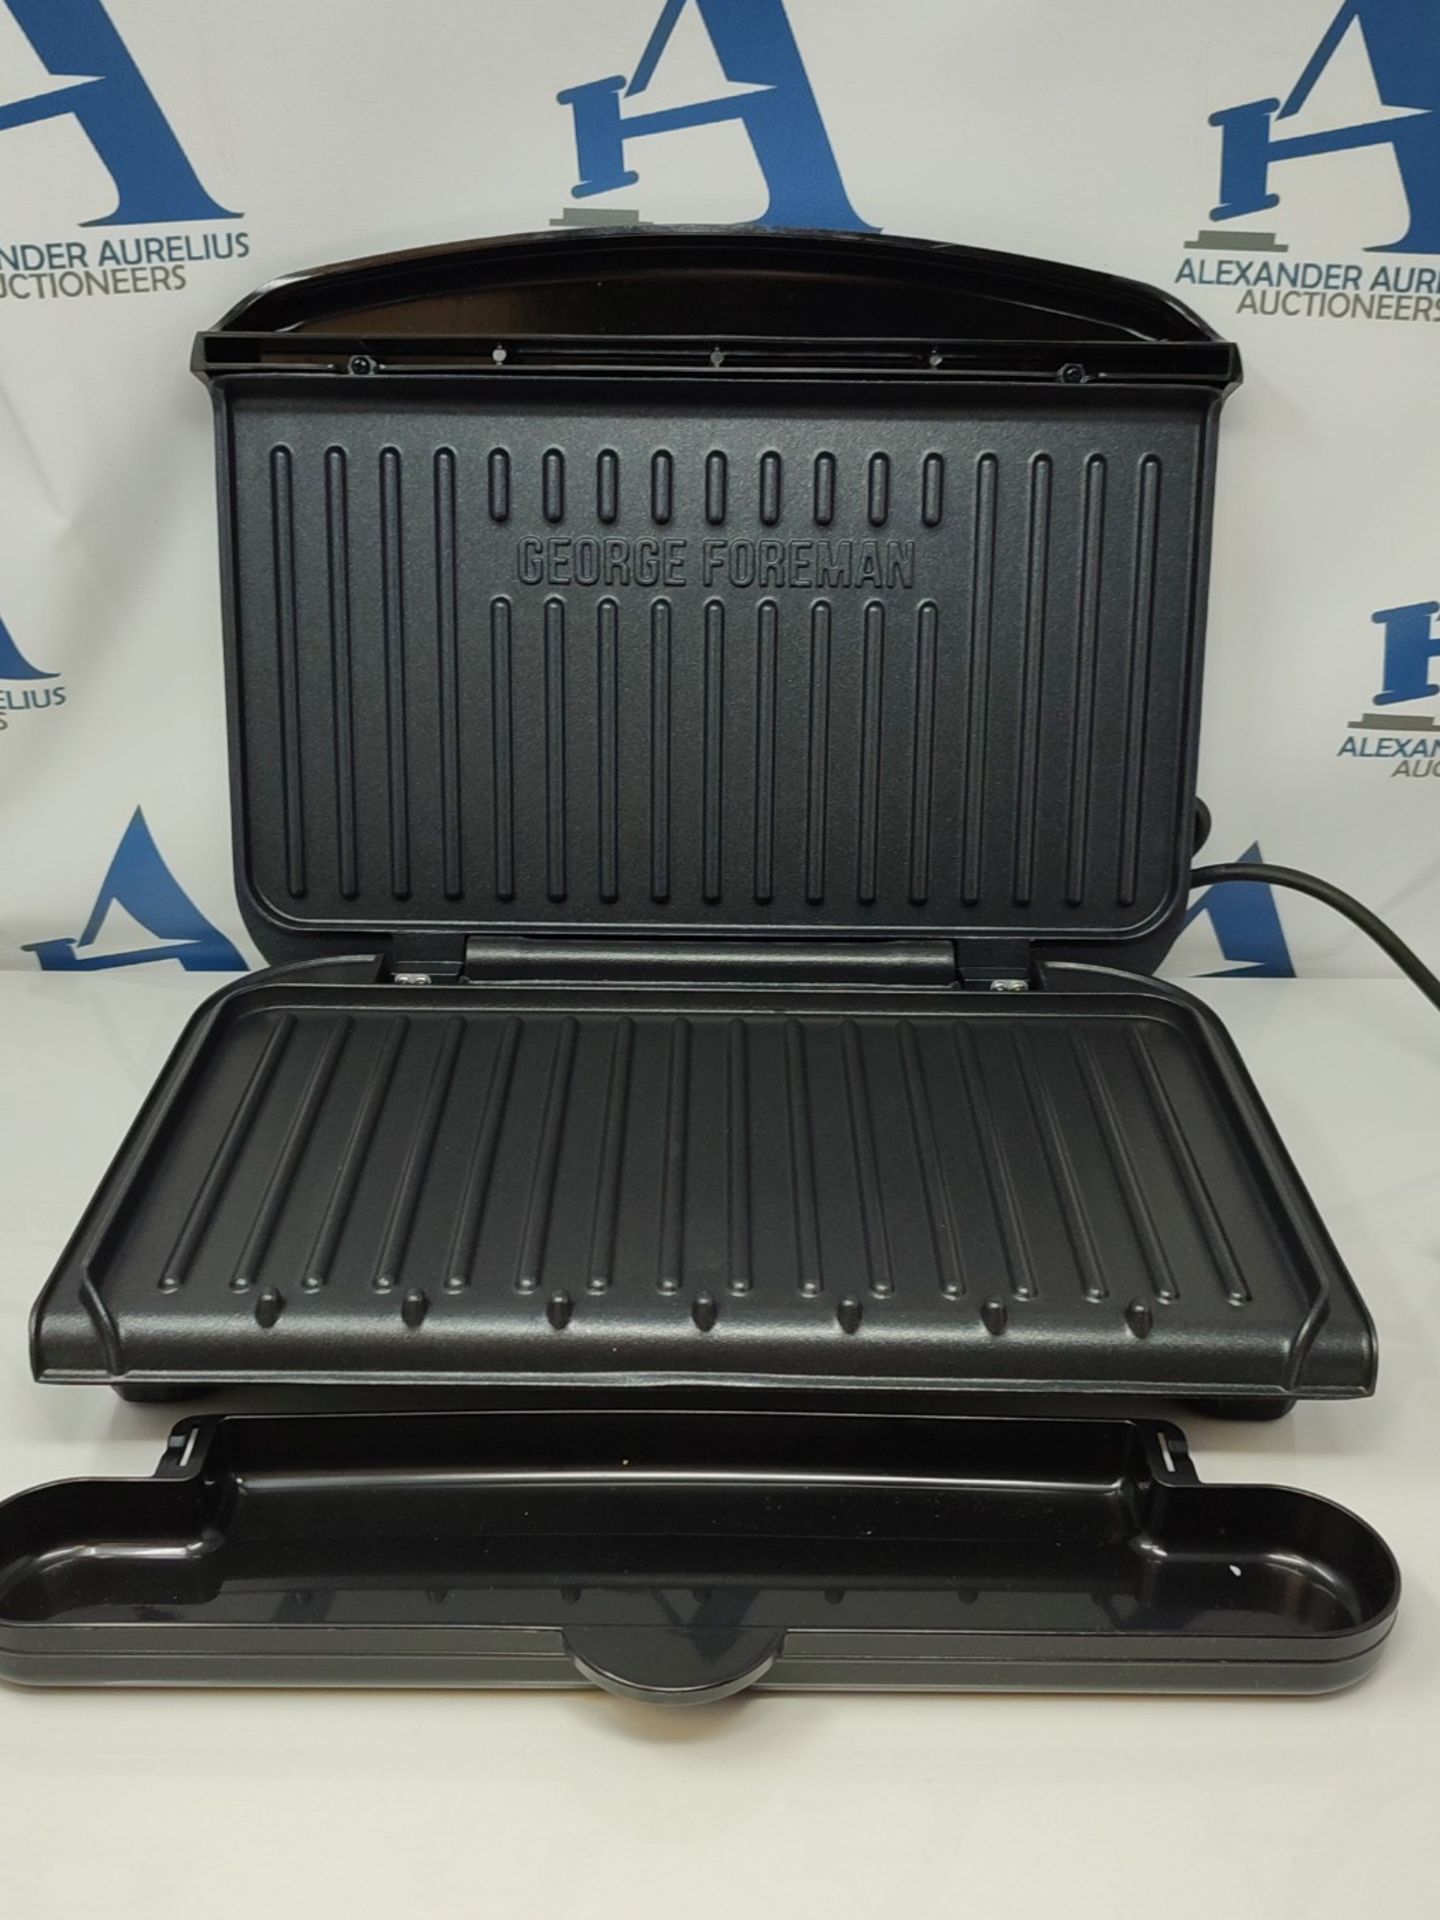 George Foreman 25810 Medium Fit Grill - Versatile Griddle, Hot Plate and Toastie Machi - Image 2 of 3